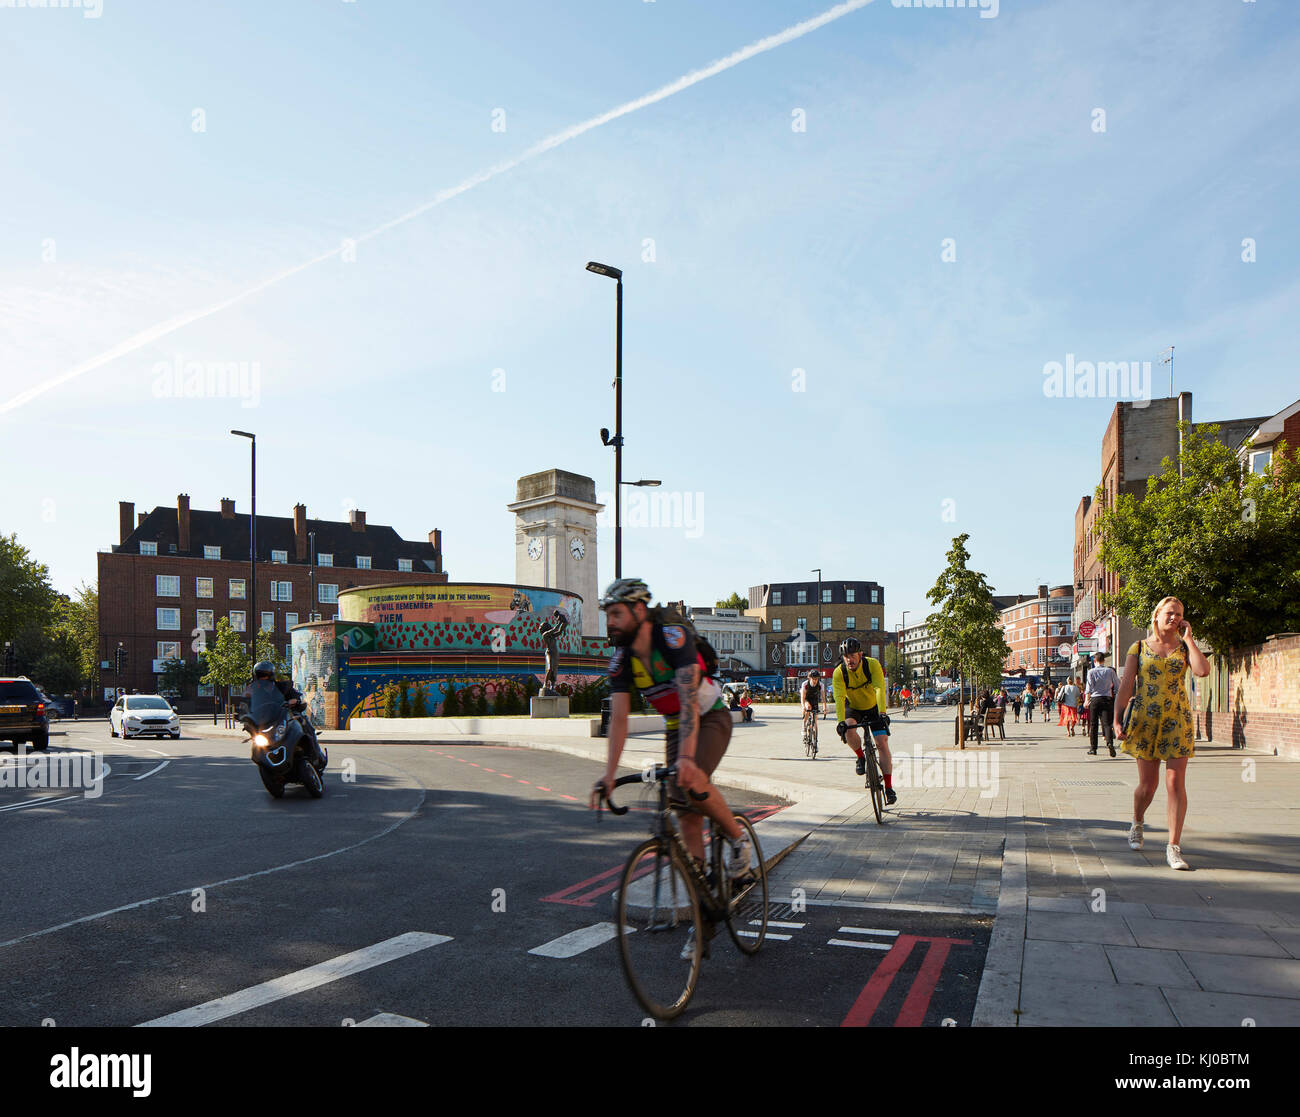 Reconfiguré intersection avec bande cyclable à Stockwell War Memorial. Stockwell Framework Masterplan, Londres, Royaume-Uni. Architecte : DSDHA, 2017. Banque D'Images